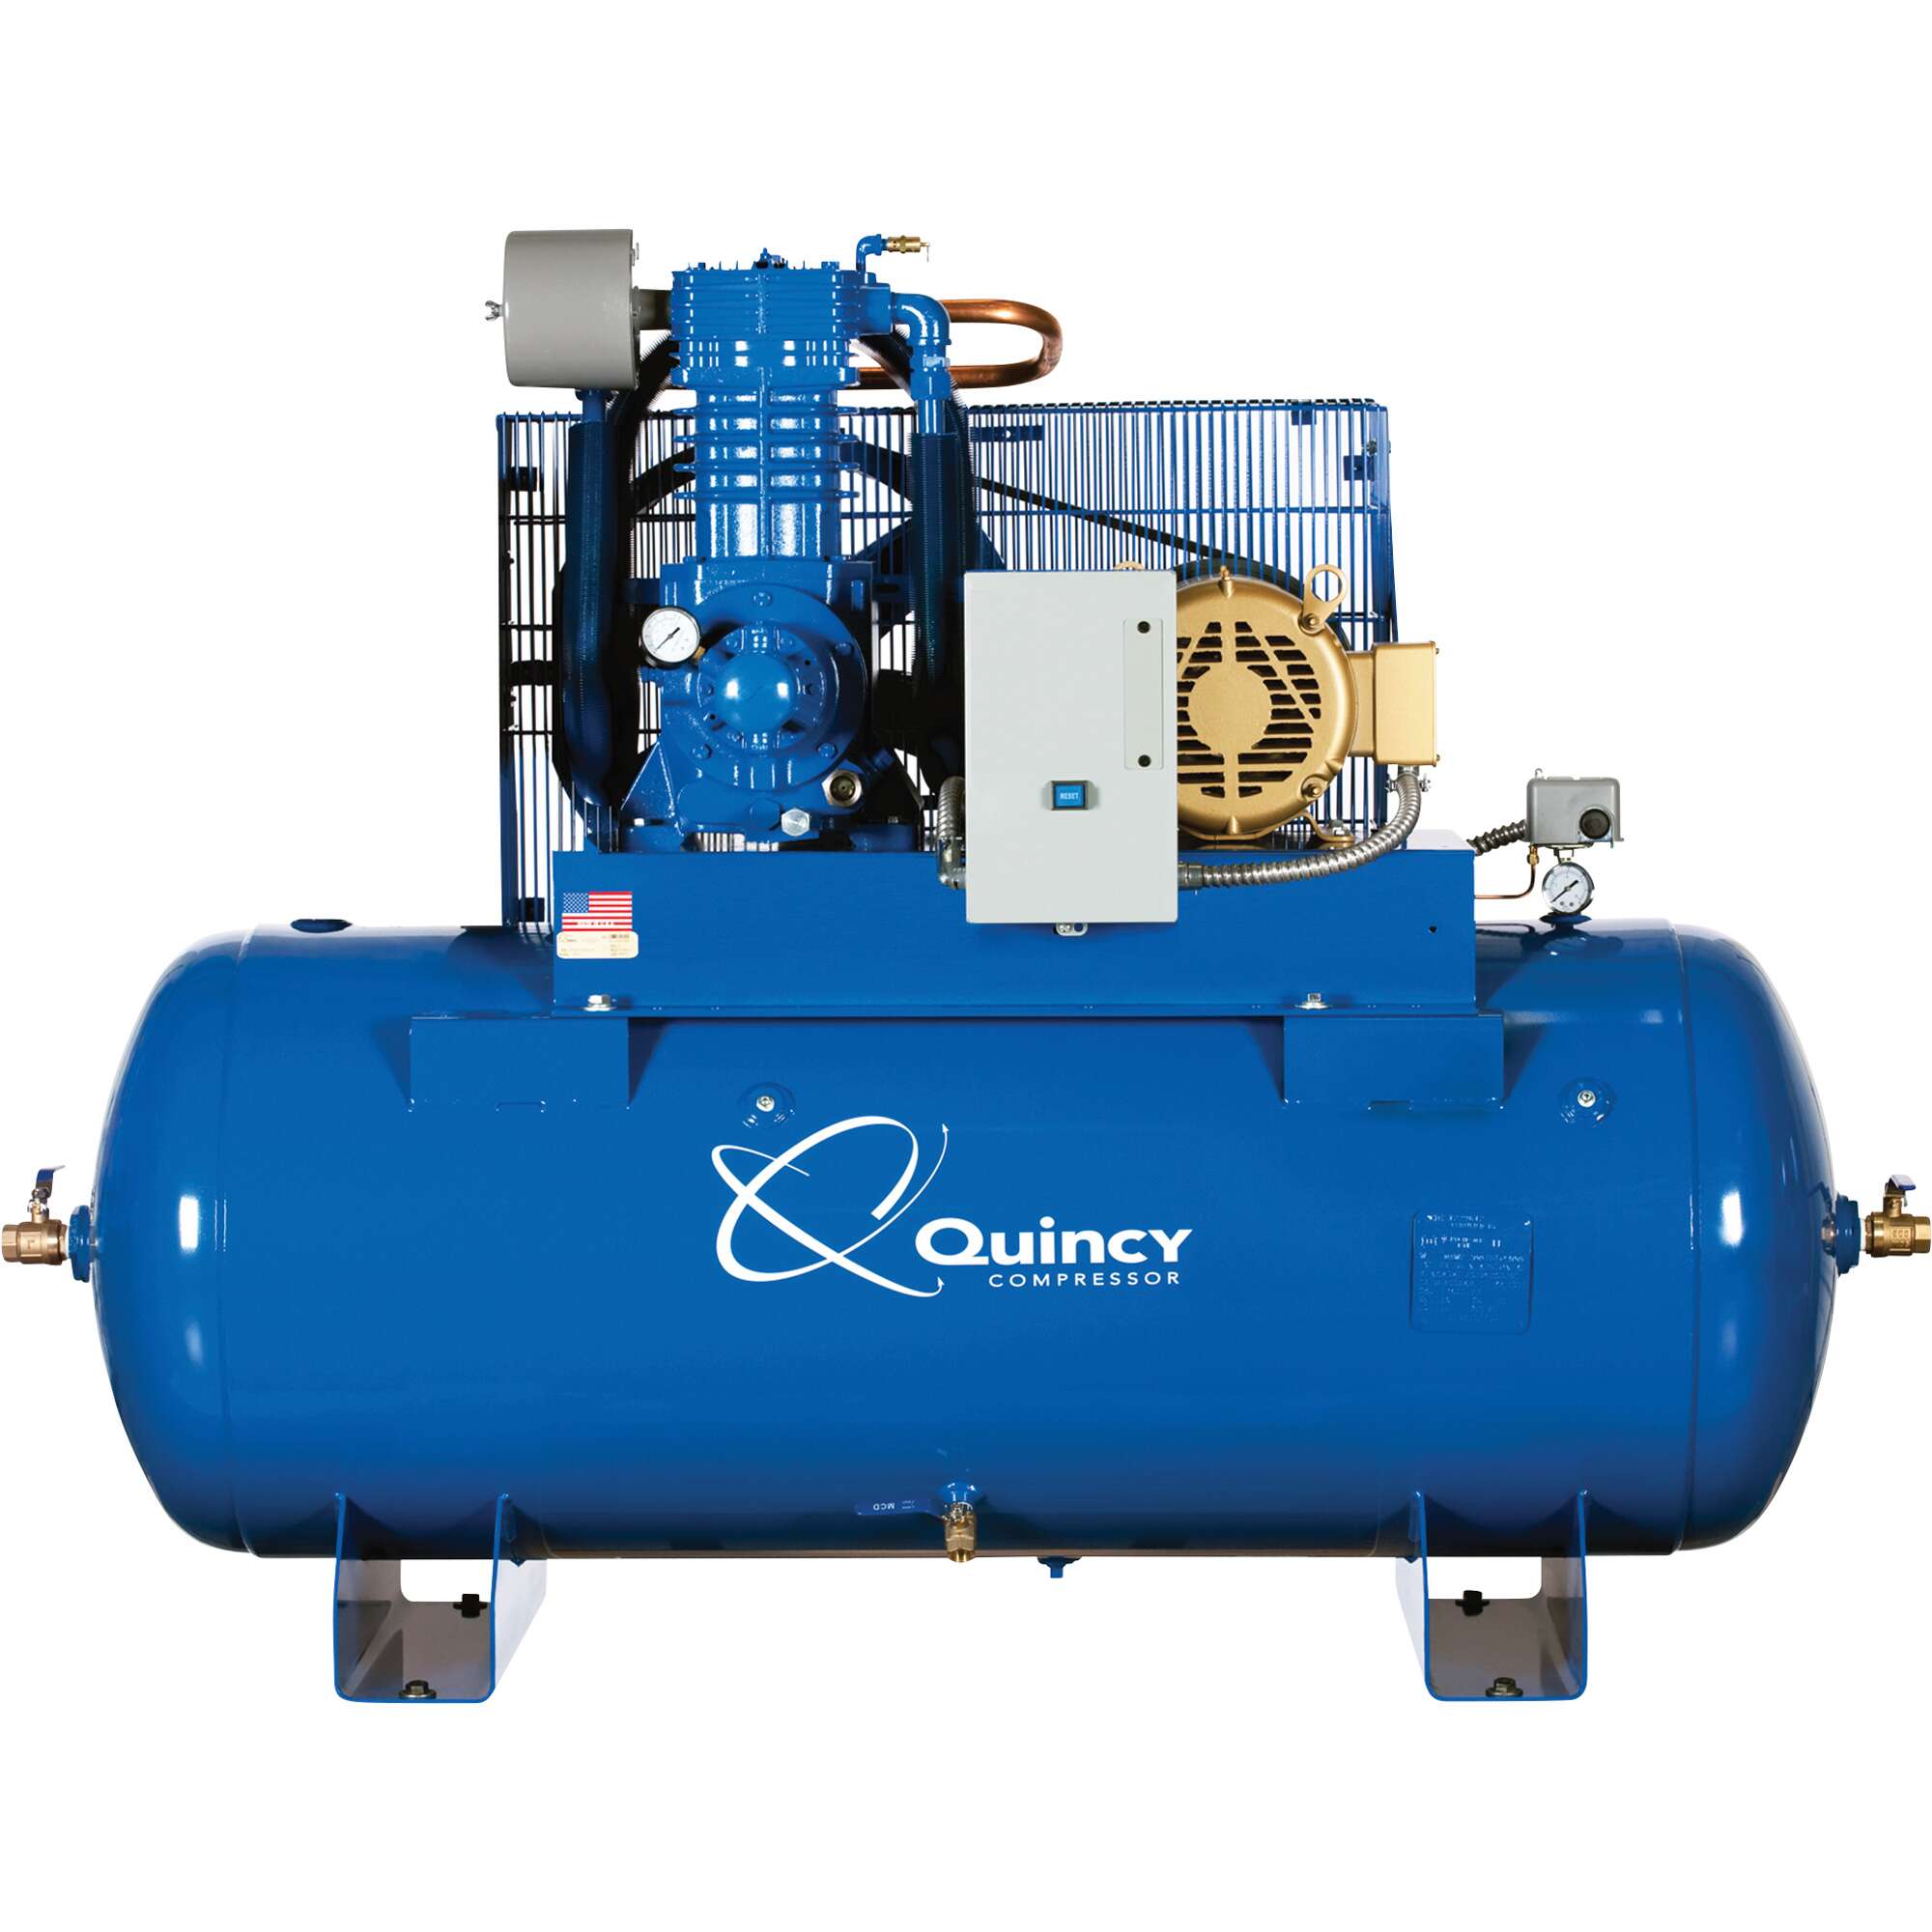 Quincy QP MAX Pressure Lubricated Reciprocating Air Compressor 10 HP 230 Volt 3 Phase 120 Gallon Horizontal